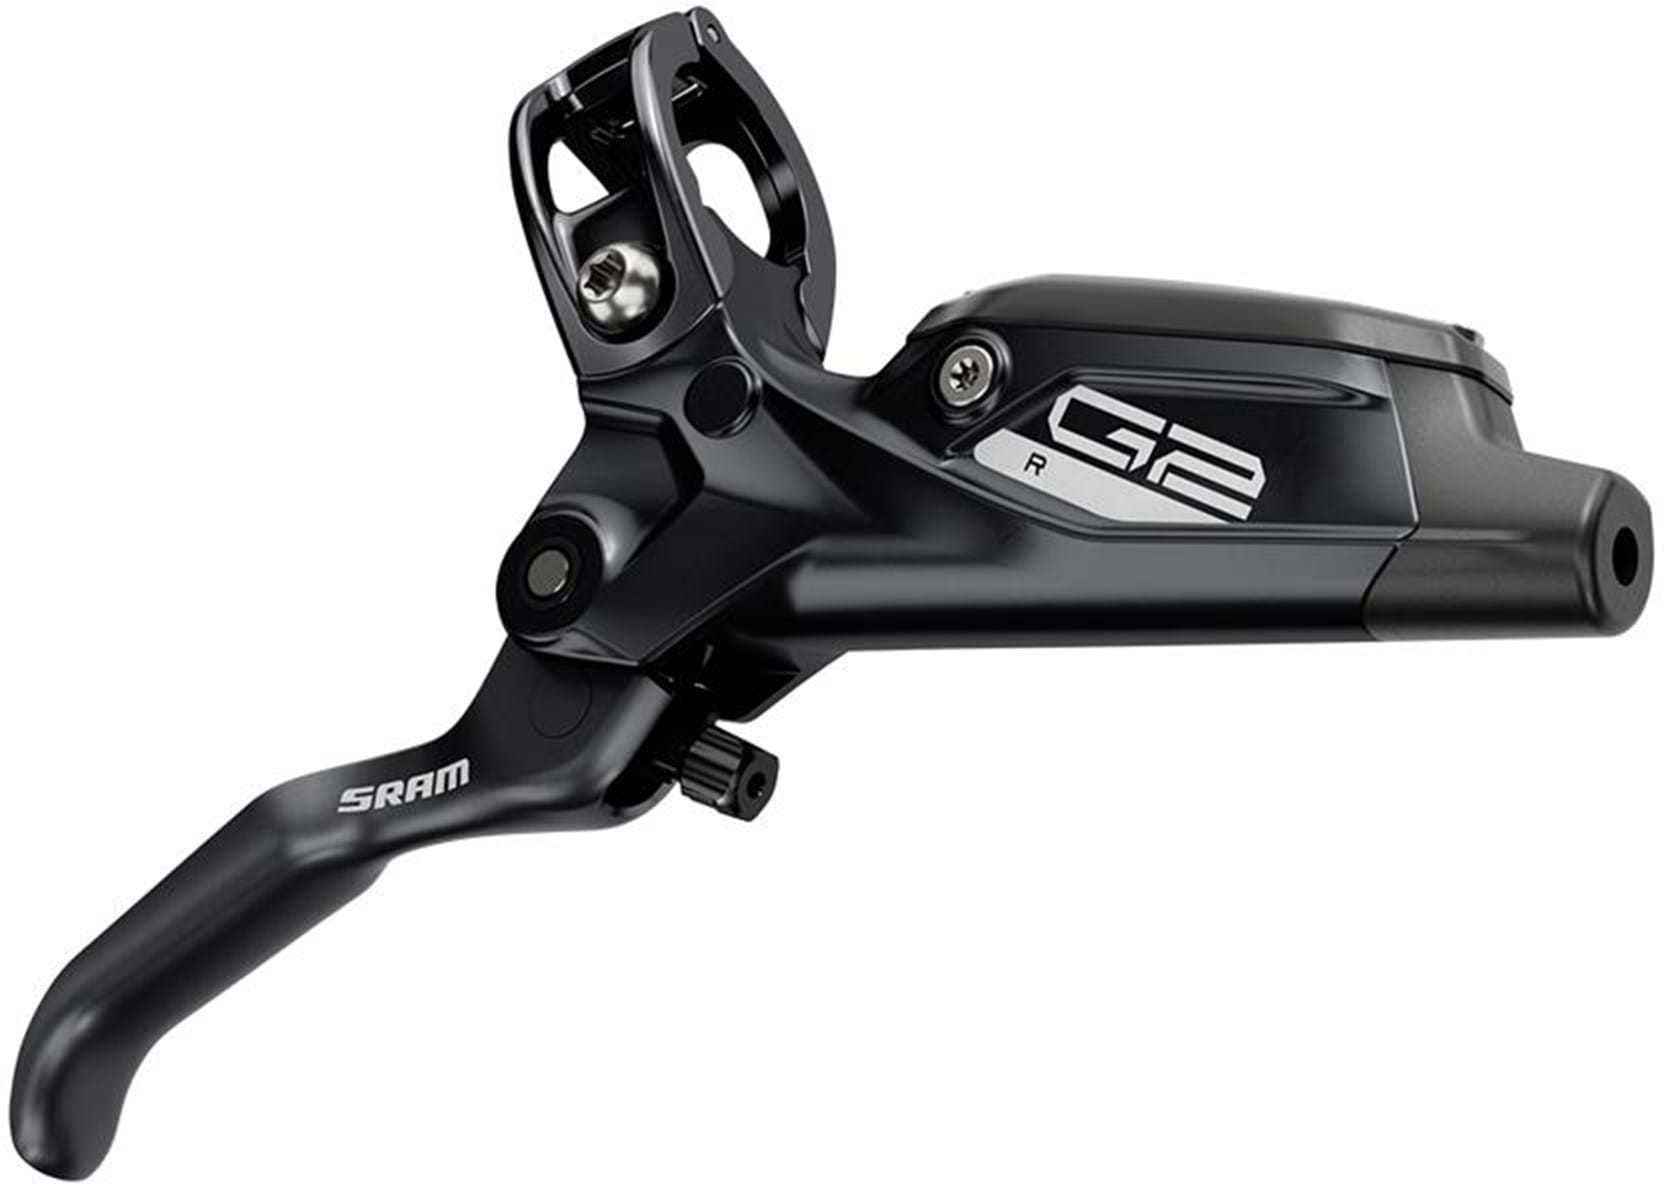 Sram BRAKE G2 R REACH ALUMINUM LEVER FRONTHOSE ROTORBRACKET SOLD SEPARATELY  A2 DIFFUSION BLACK ANODIZED 950MM The Bicycle Chain